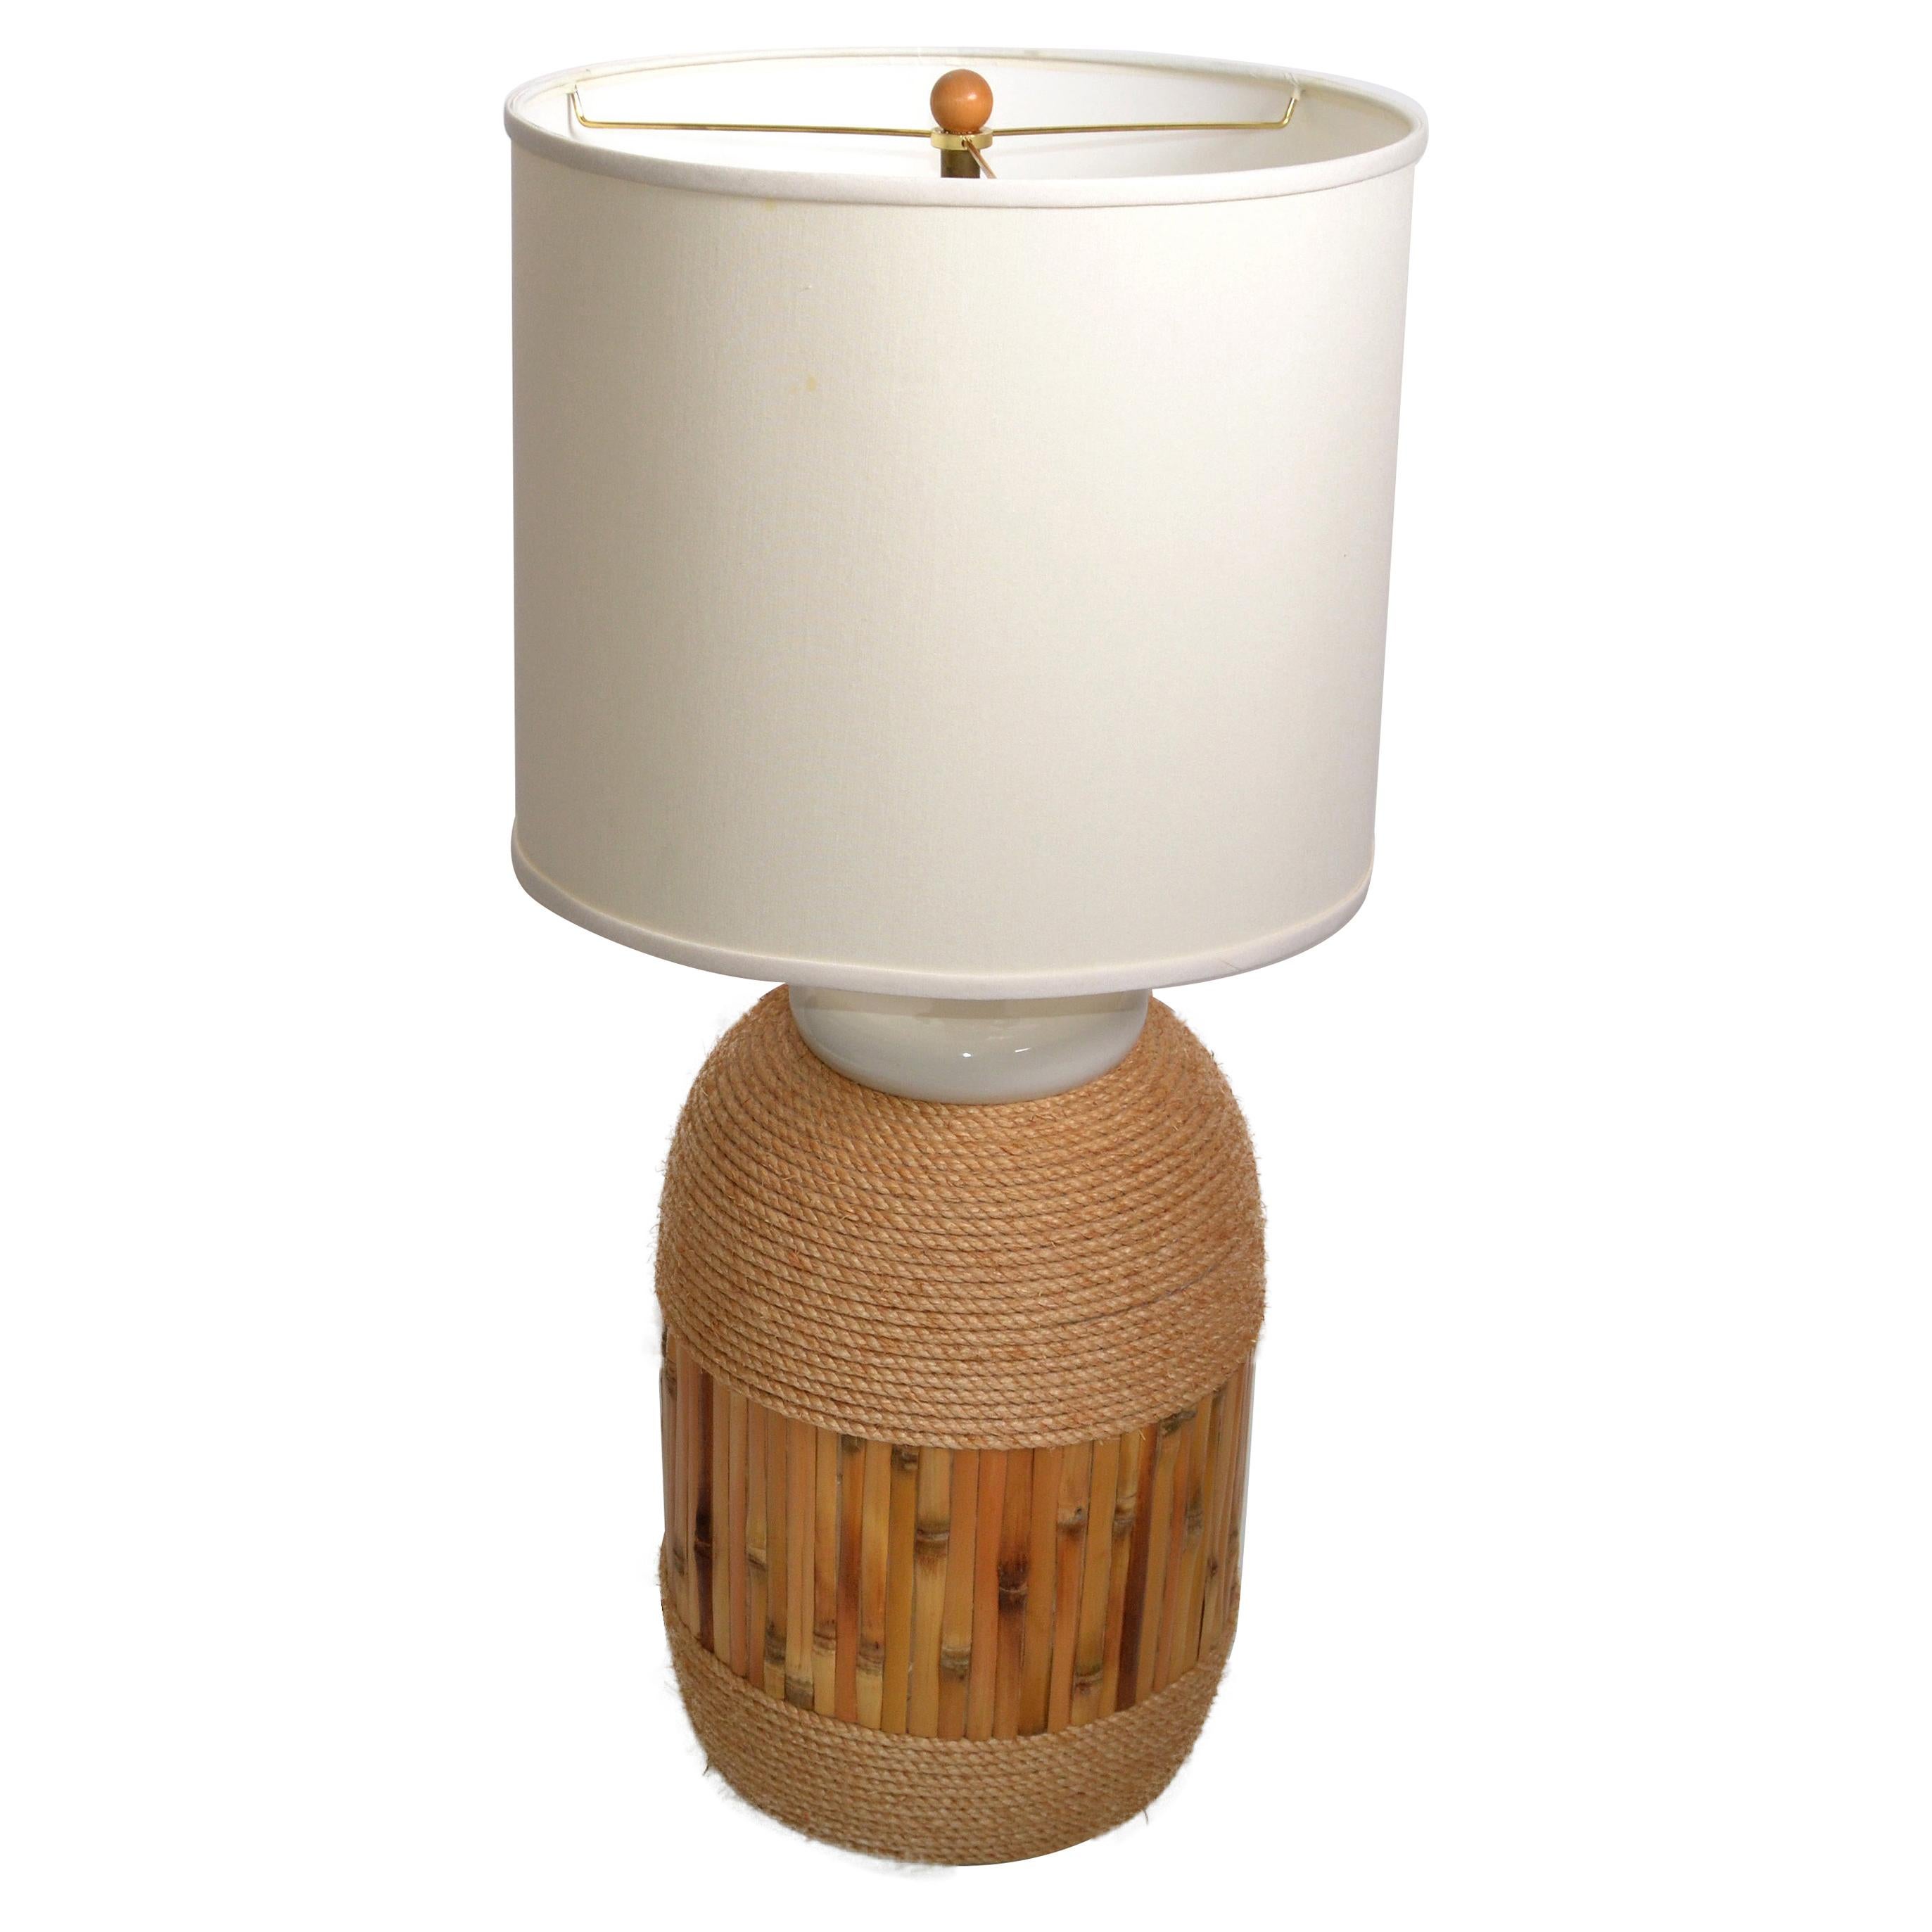 Mid-Century Modern Nautical Ceramic Table Lamp Enfold In Bamboo & Rope 1970s